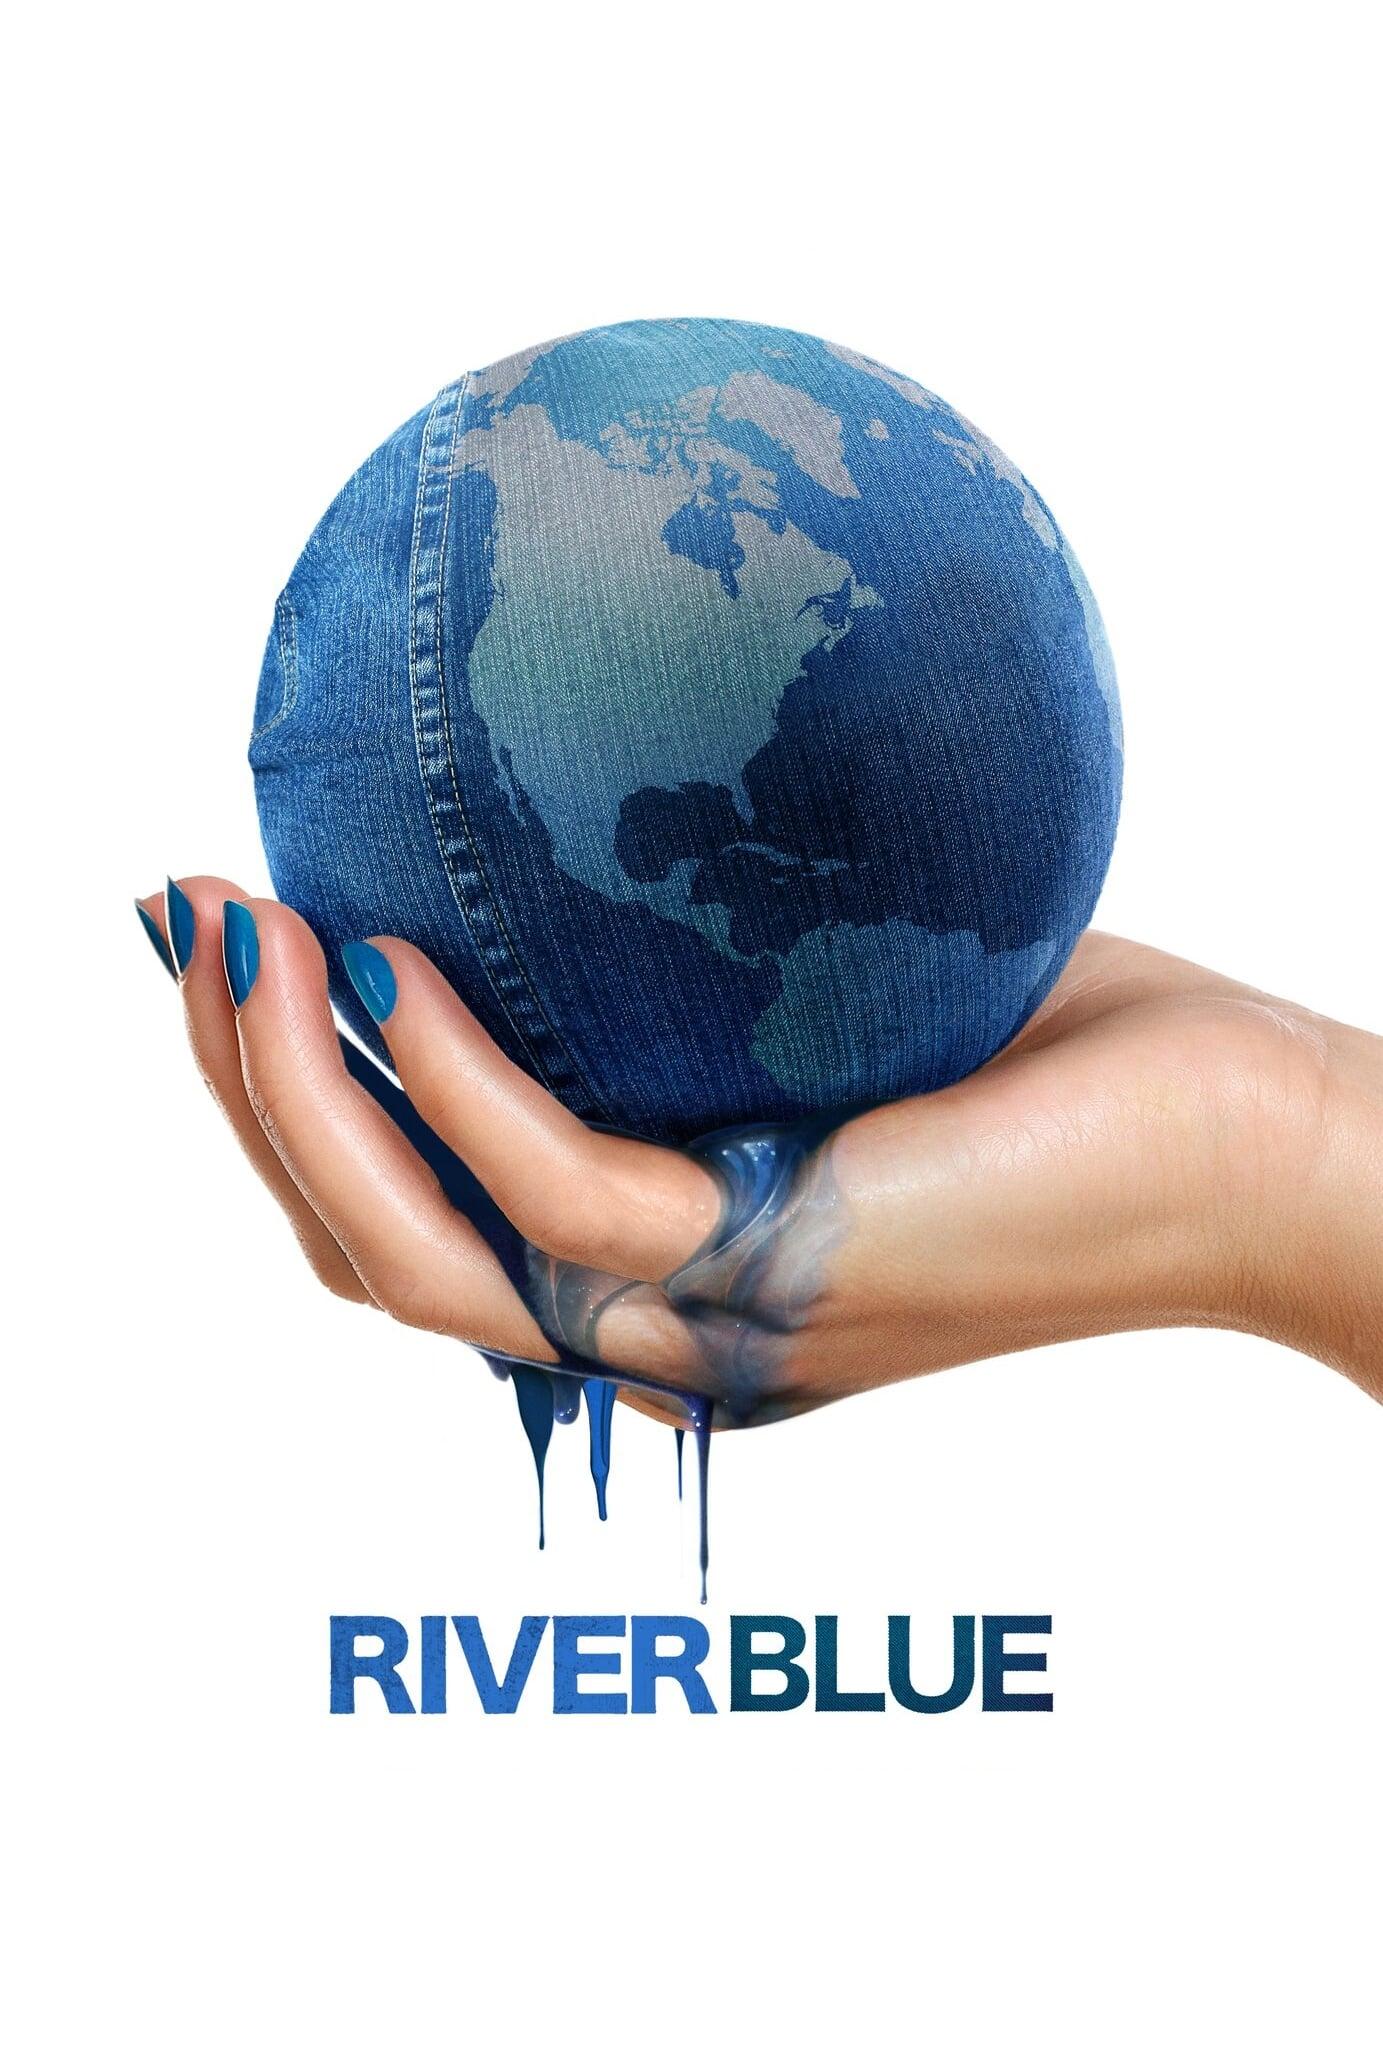 RiverBlue poster